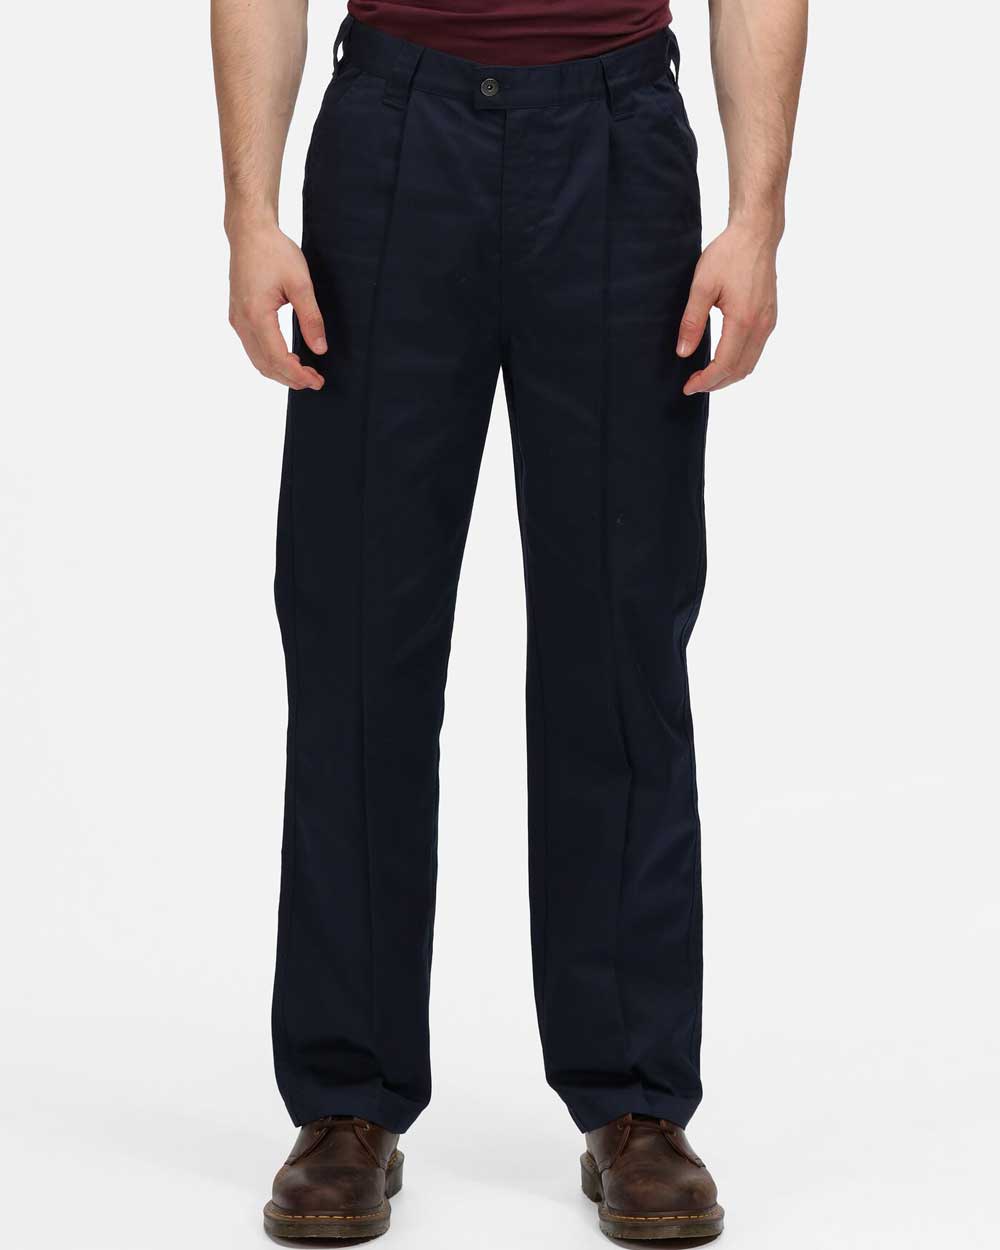 Regatta Navy Lined Action Trousers | Regatta | Work Trousers | Arco